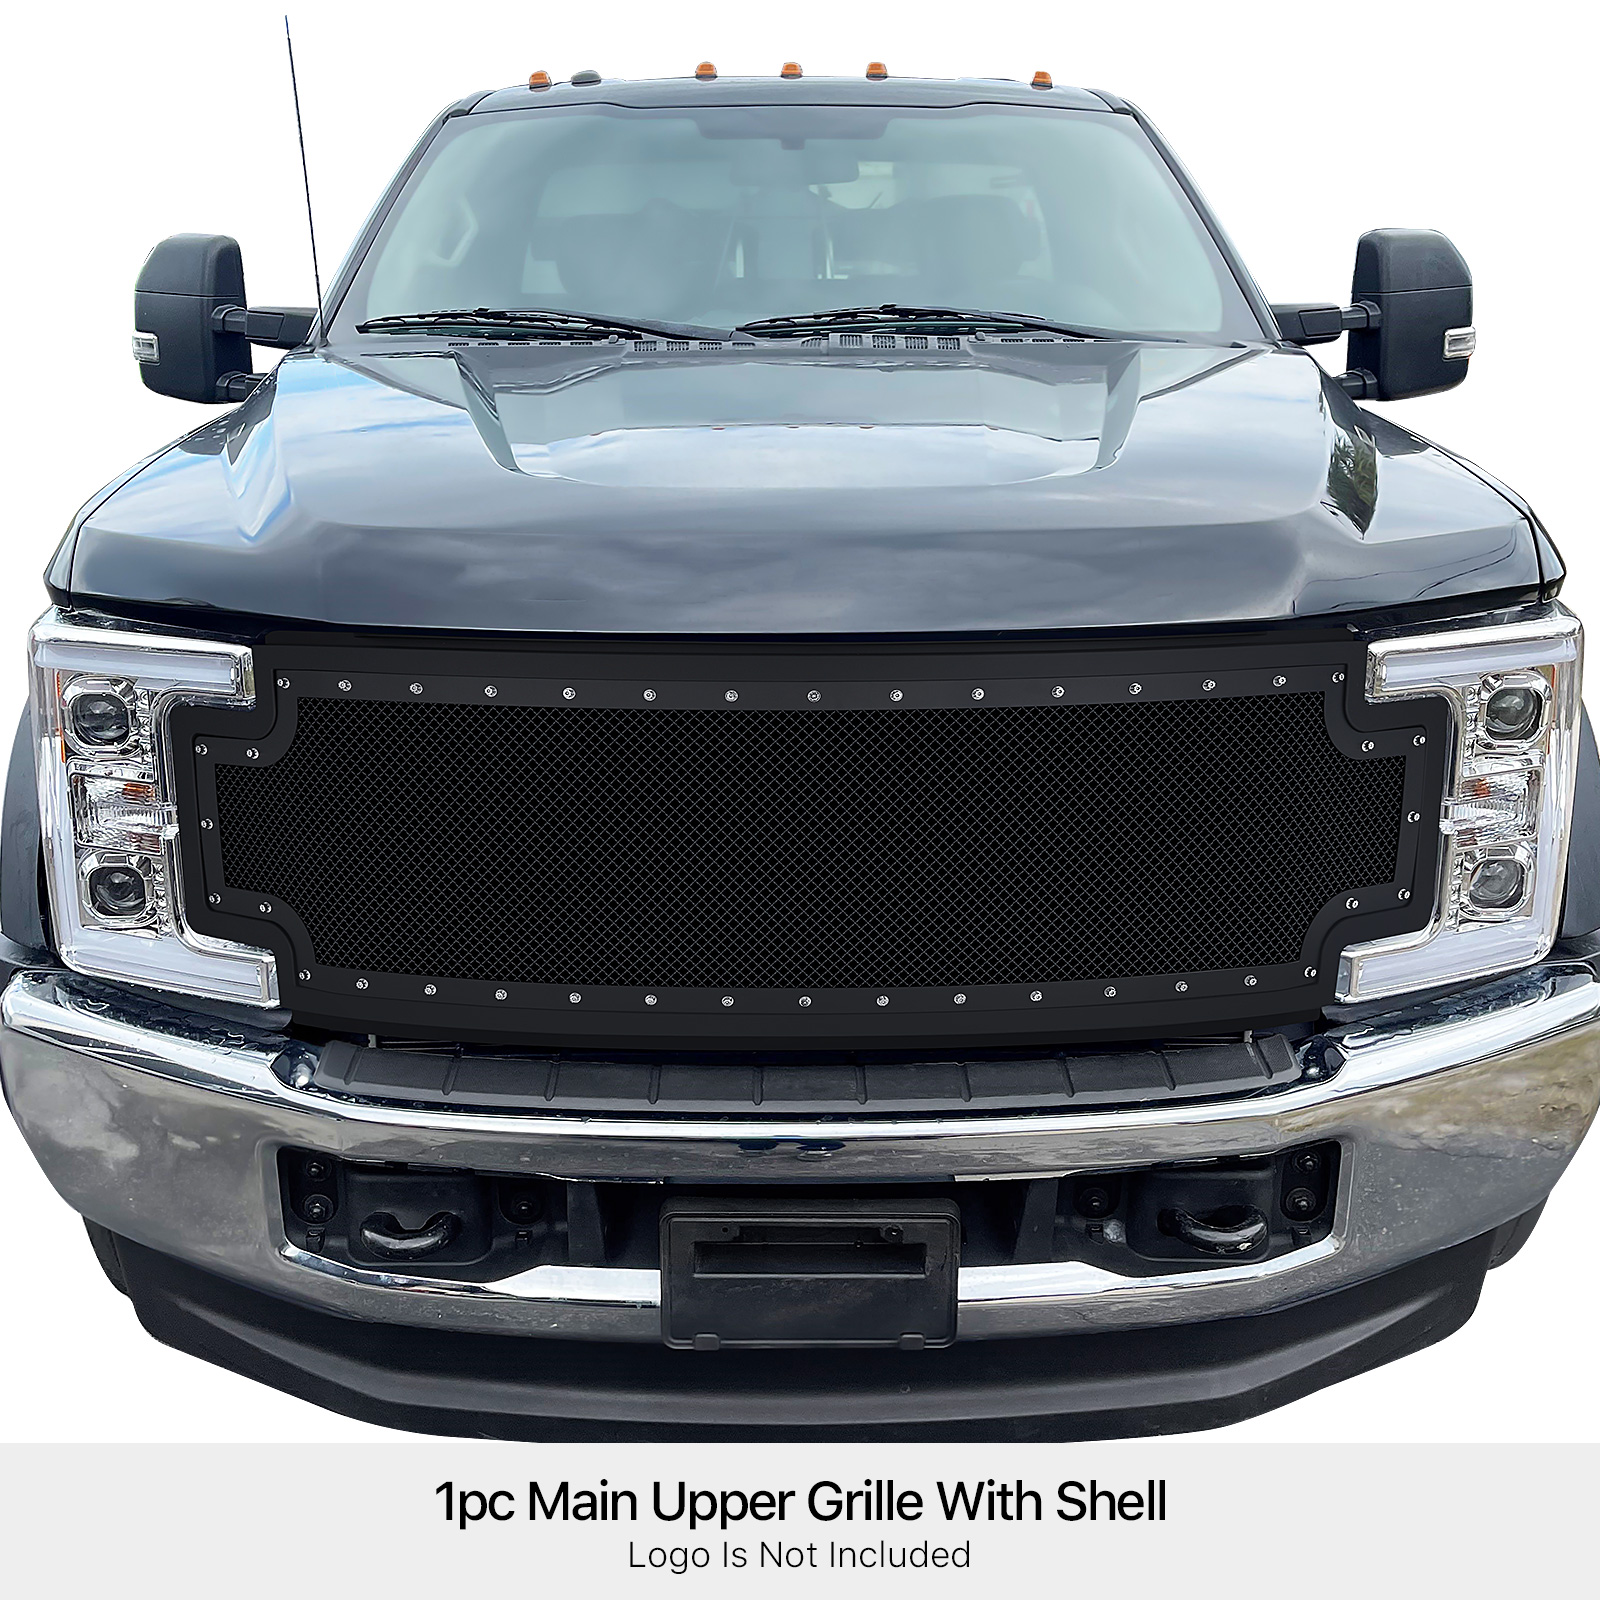 2017-2019 Ford F-250 Without Front Camera/2017-2019 Ford F-350 Without Front Camera/2017-2019 Ford F-450 Without Front Camera/2017-2019 Ford F-550 Without Front Camera MAIN UPPER Package Grille